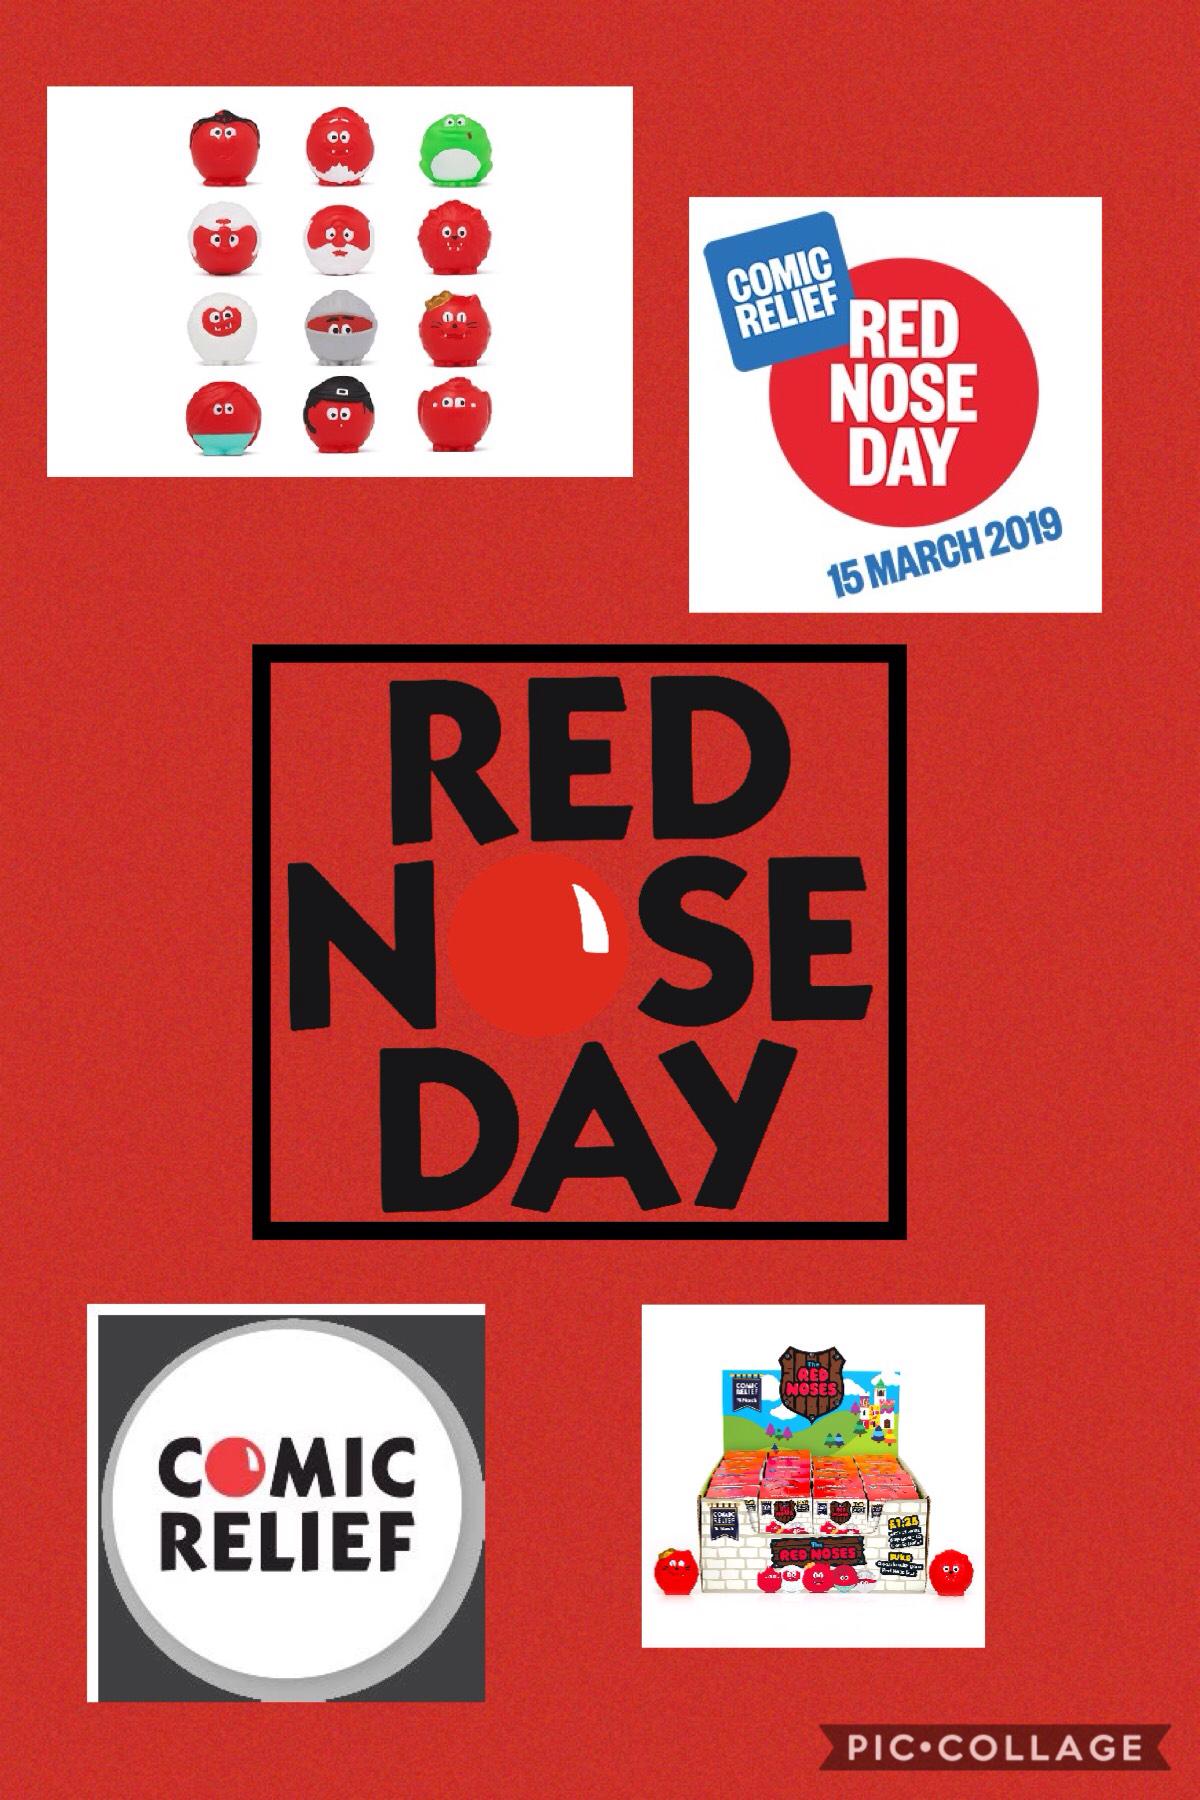 Happy Red Nose Day guys!❤️